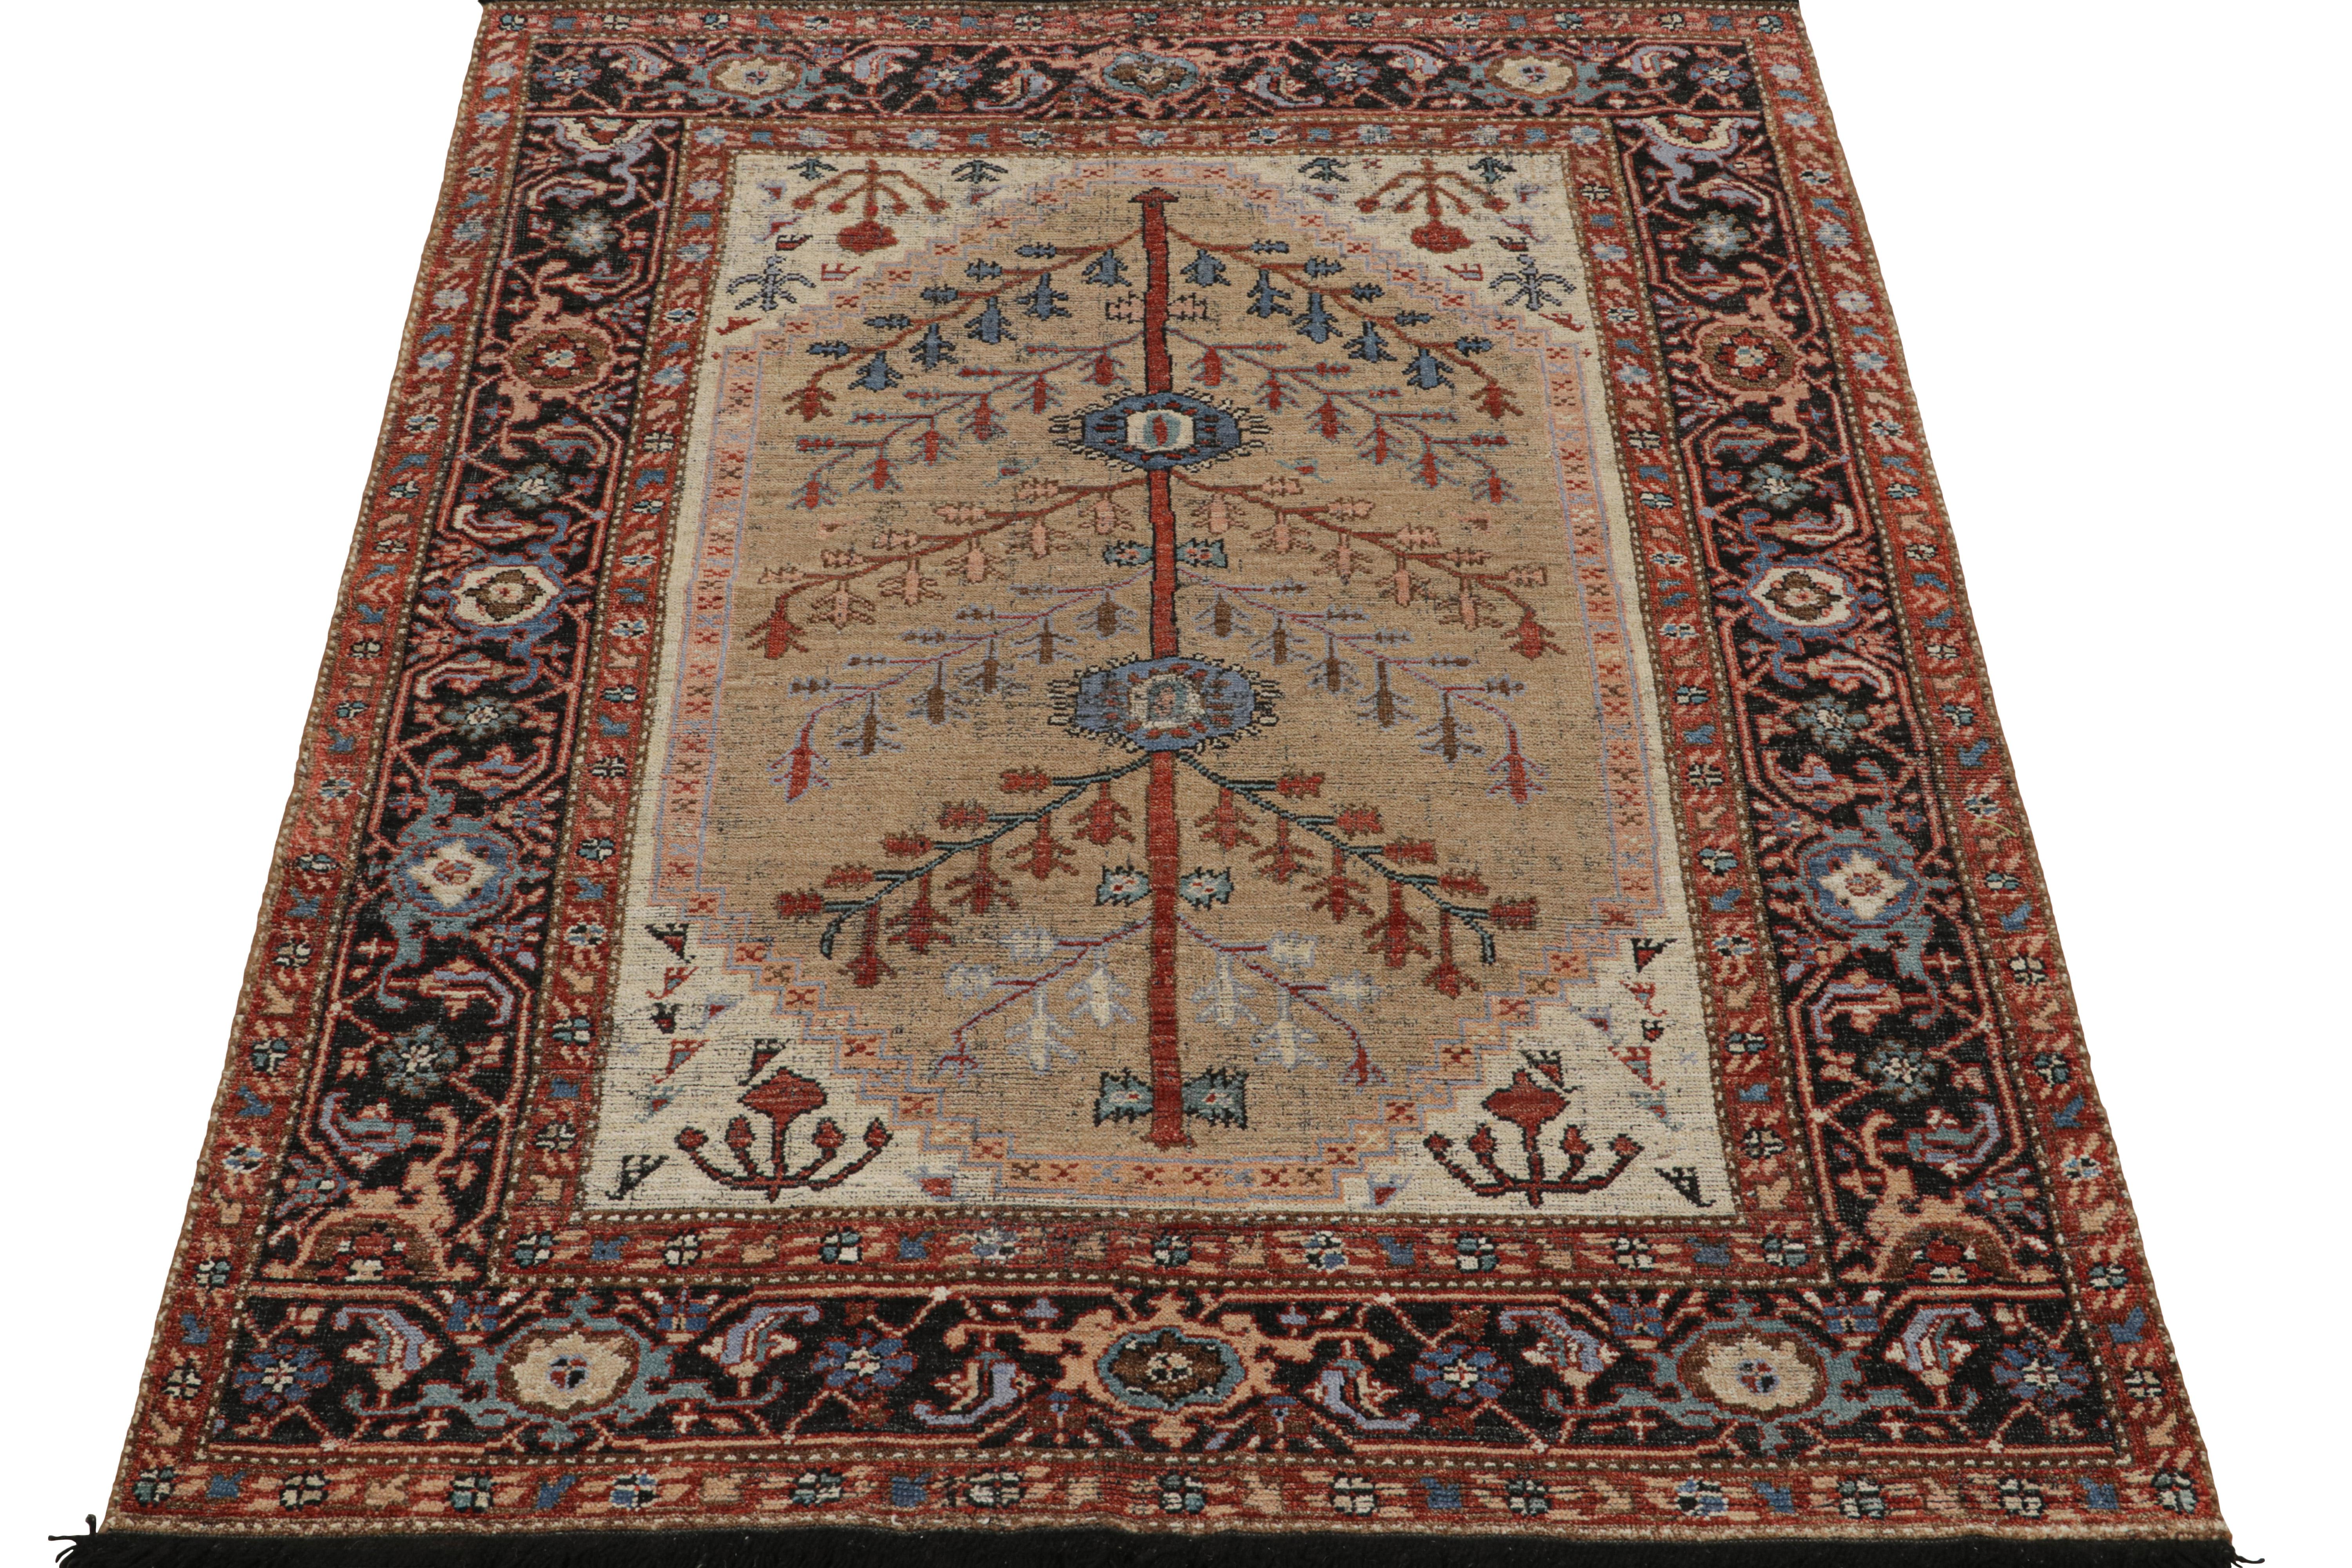 Indian Rug & Kilim’s Antique Tribal Style rug in Red, Blue & Brown Patterns For Sale